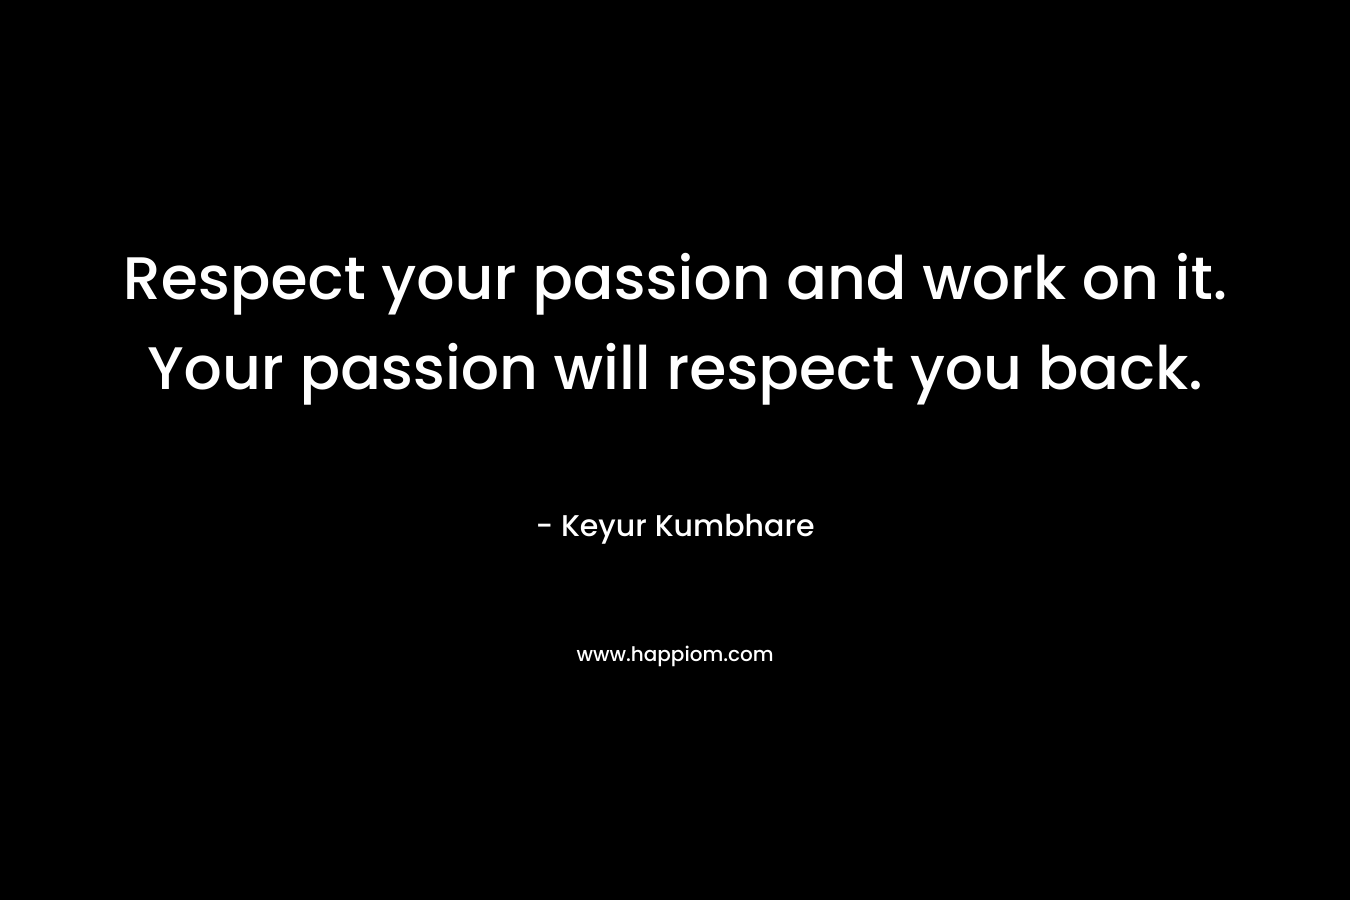 Respect your passion and work on it. Your passion will respect you back.